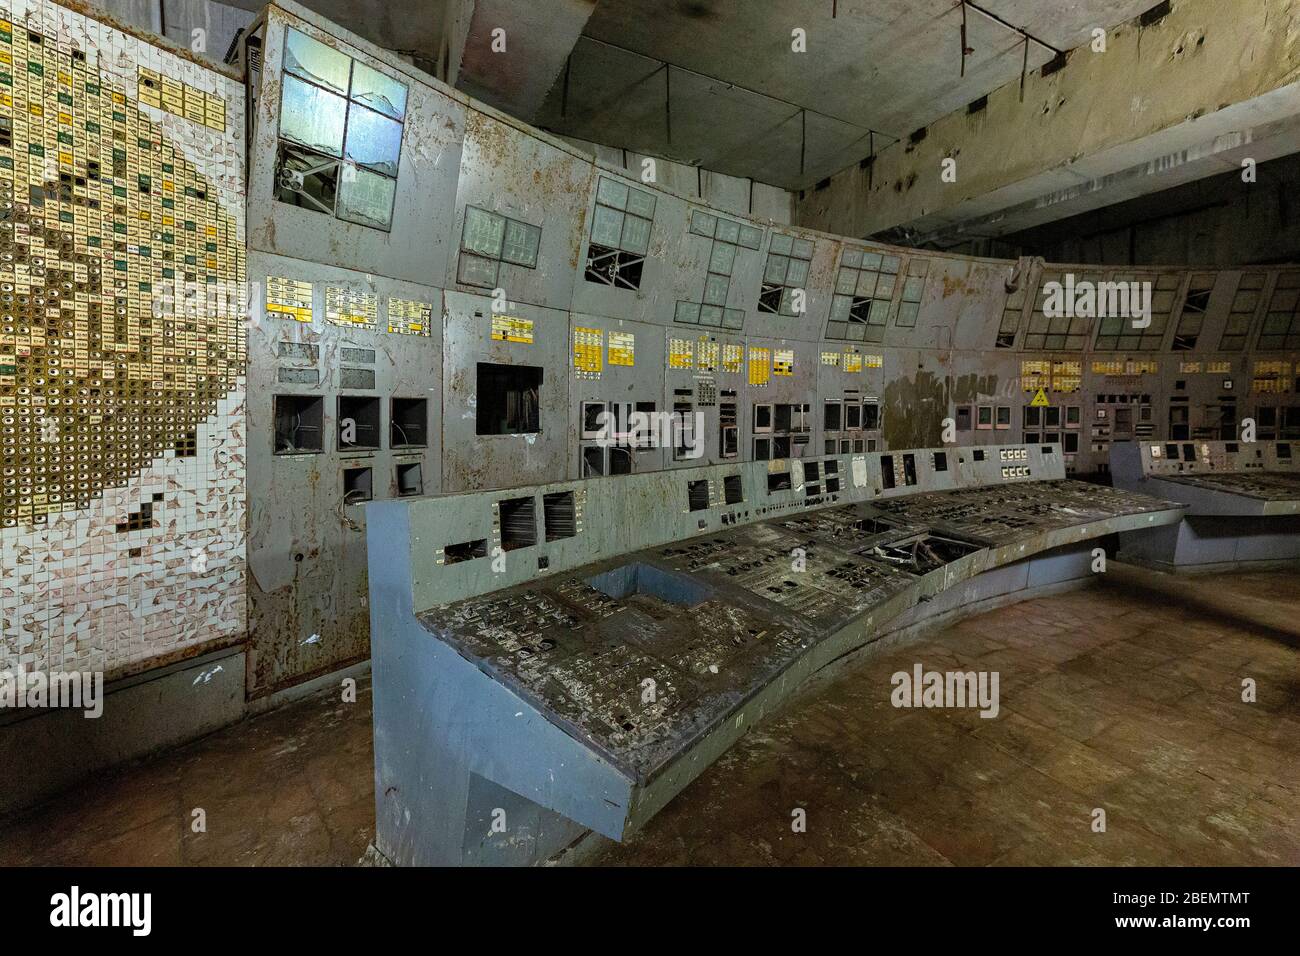 The October 19, 2019, the exploded Chernobyl nuclear reactor number 4 control (operations) room in Chernobyl Nuclear Power Plant in abandoned territor Stock Photo